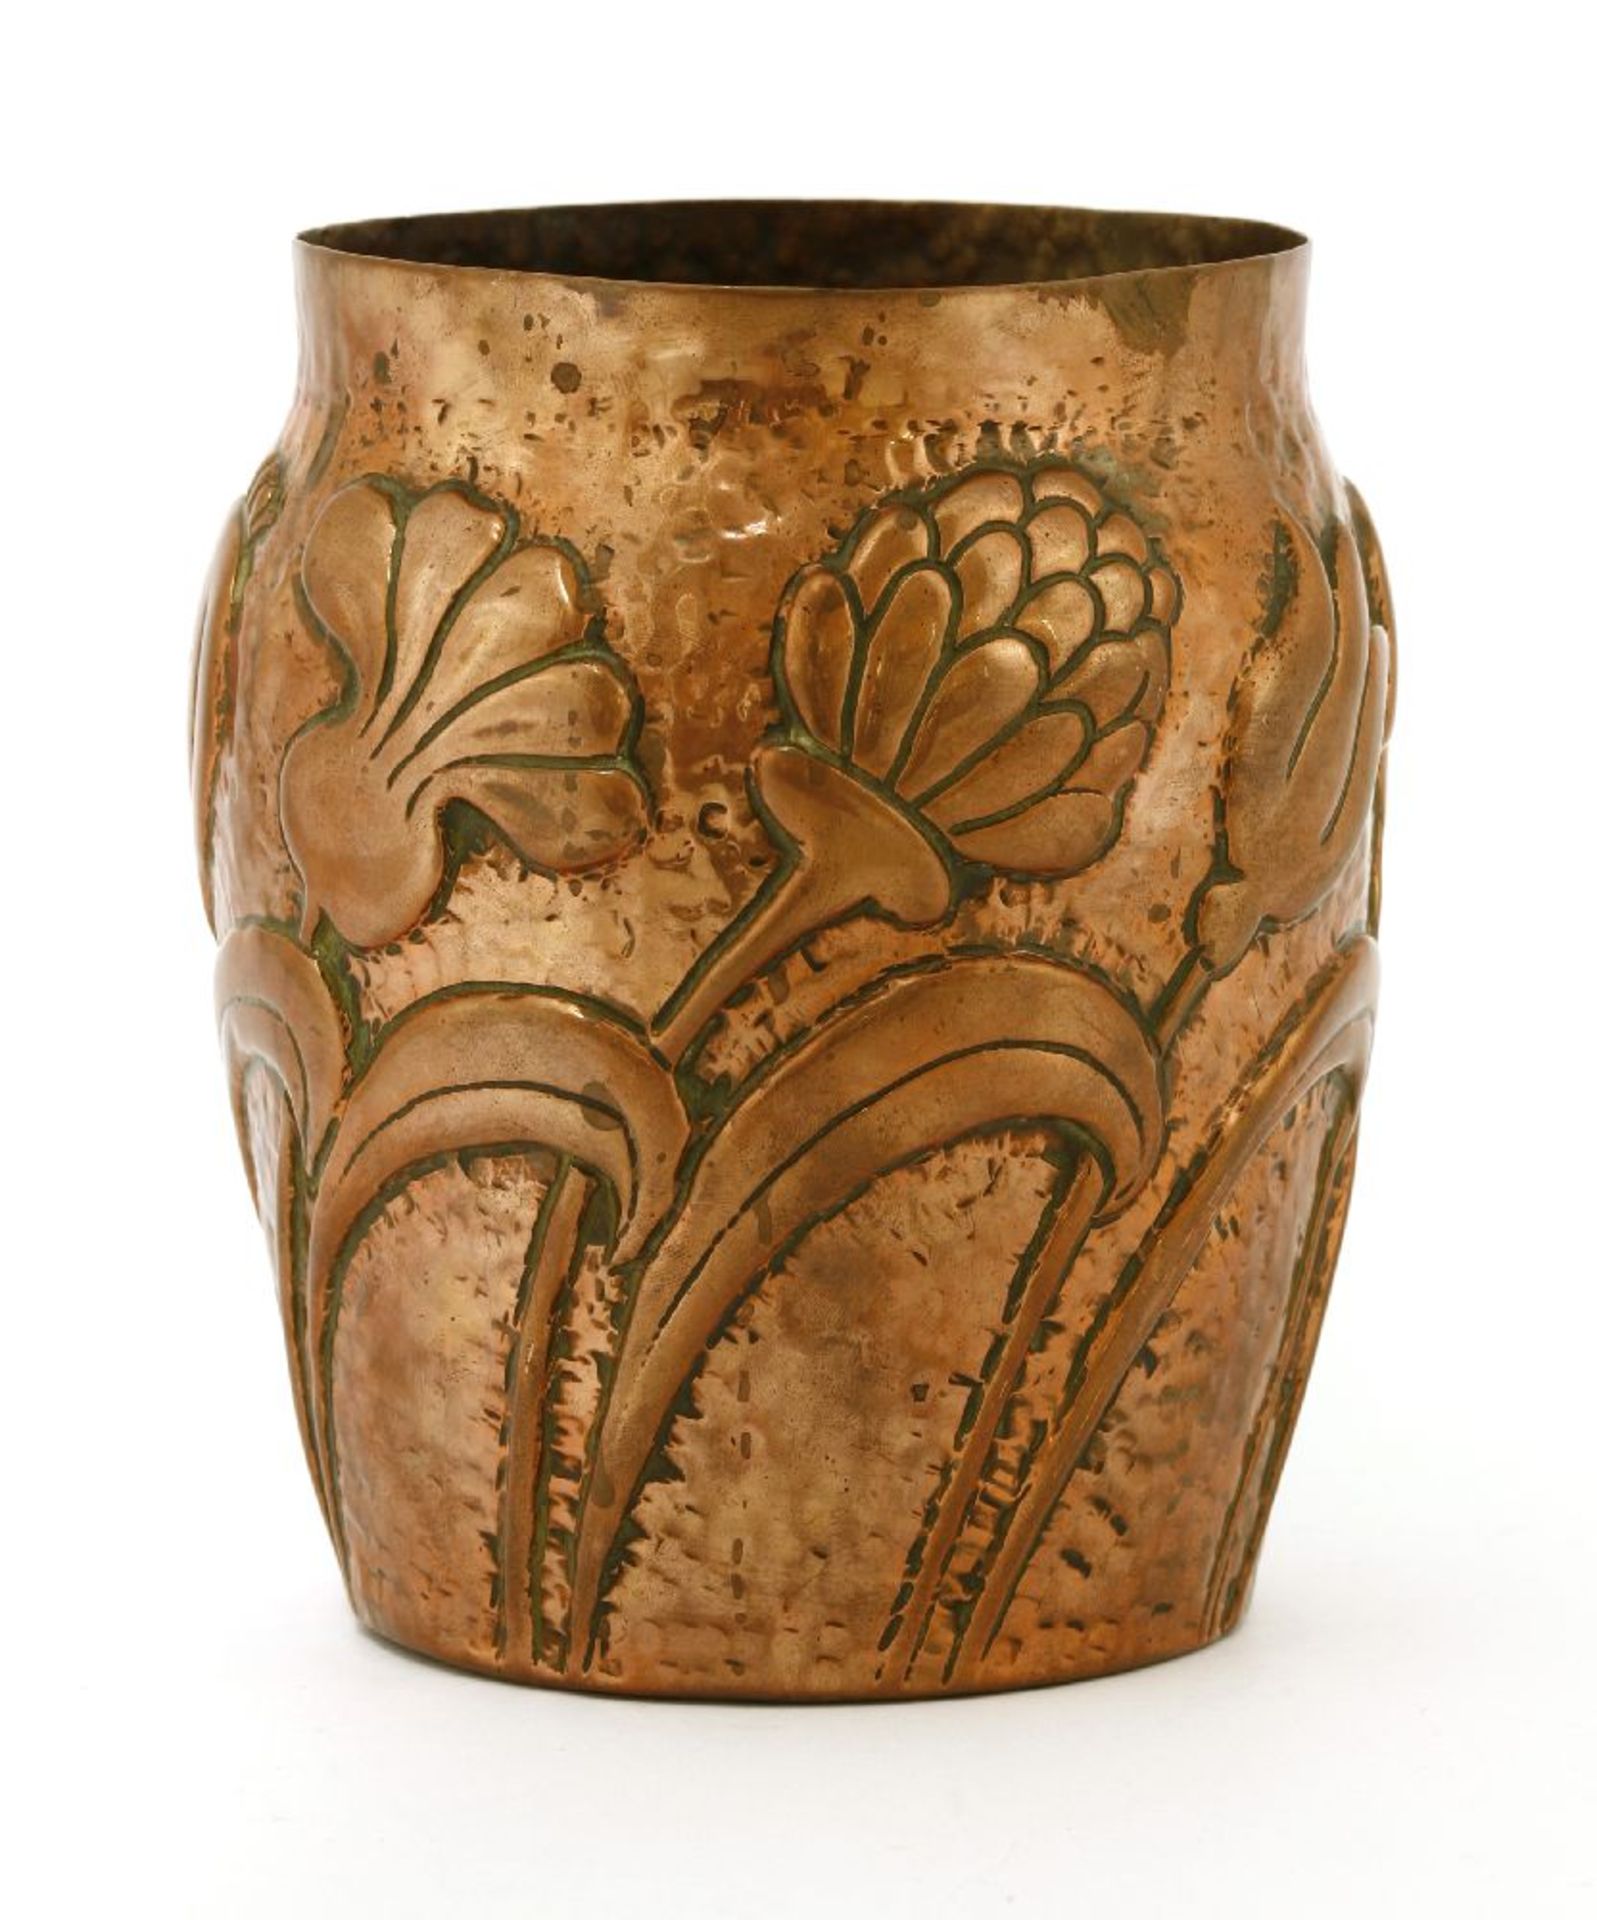 A copper vase,by John Pearson, embossed with flowers on a hammered ground, struck 'J.P. 1908' and